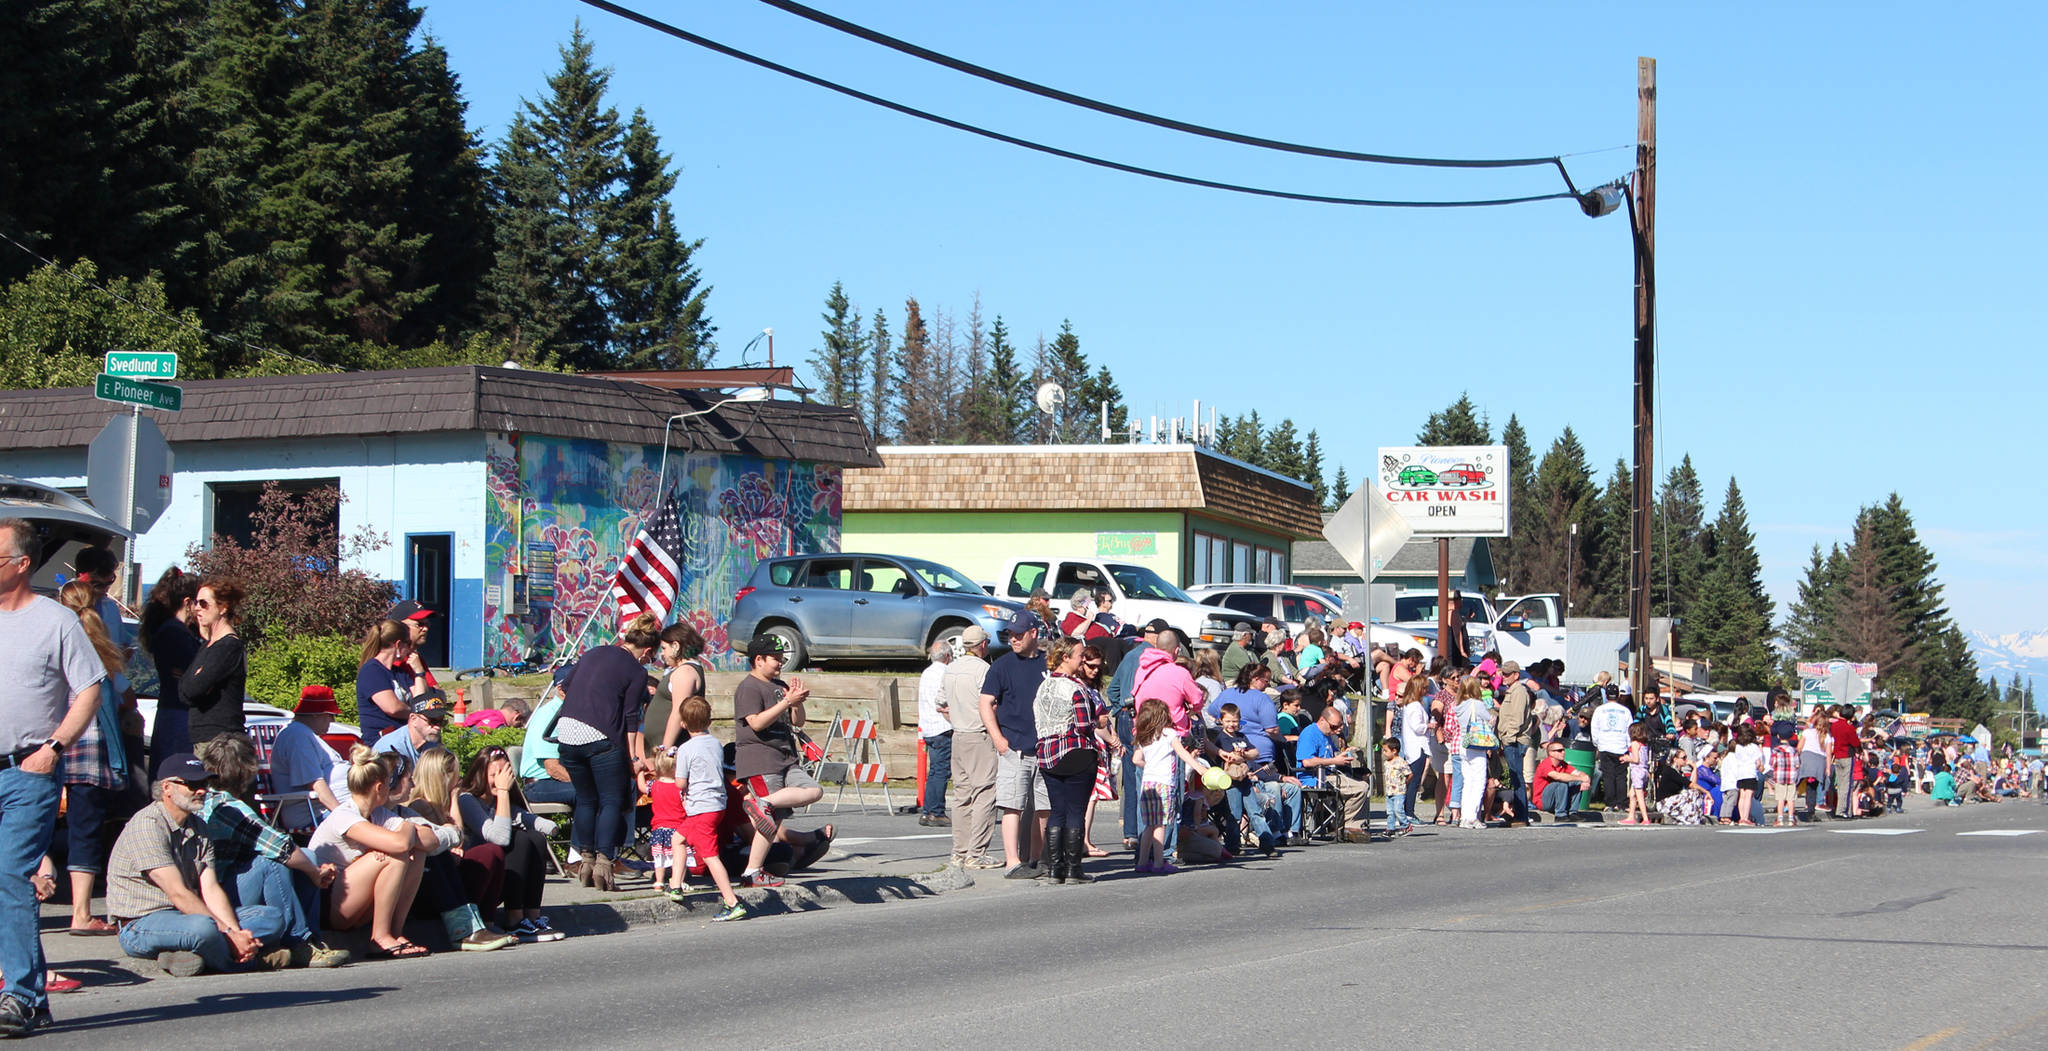 Homer area families line Pioneer Avenue in anticipation of this year’s Independence Day parade Wednesday, July 4, 2018 in Homer, Alaska. (Photo by Megan Pacer/Homer News).